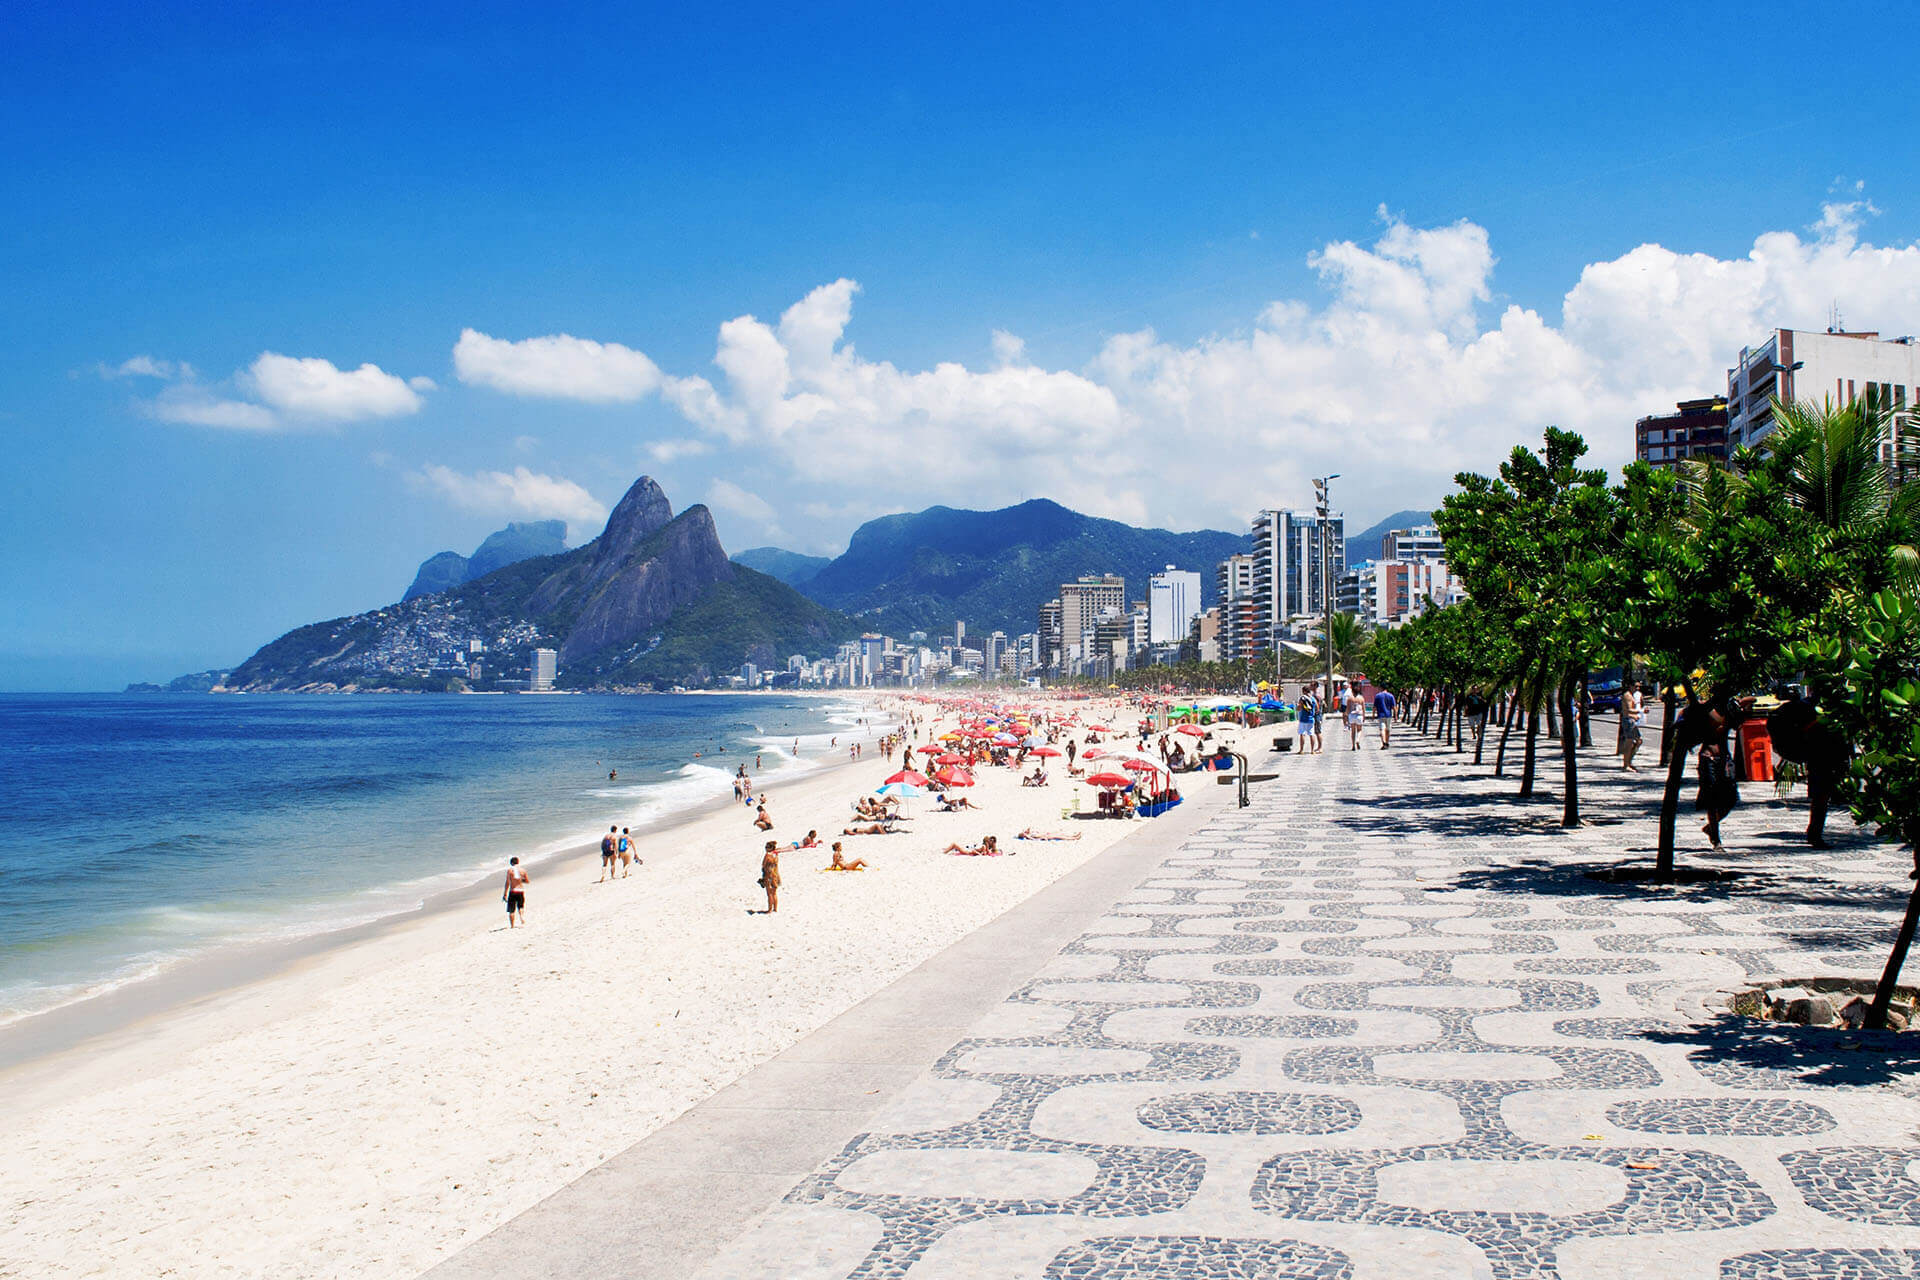 Brazil: COVID-19 Entry Requirements Updated for Travelers by Air